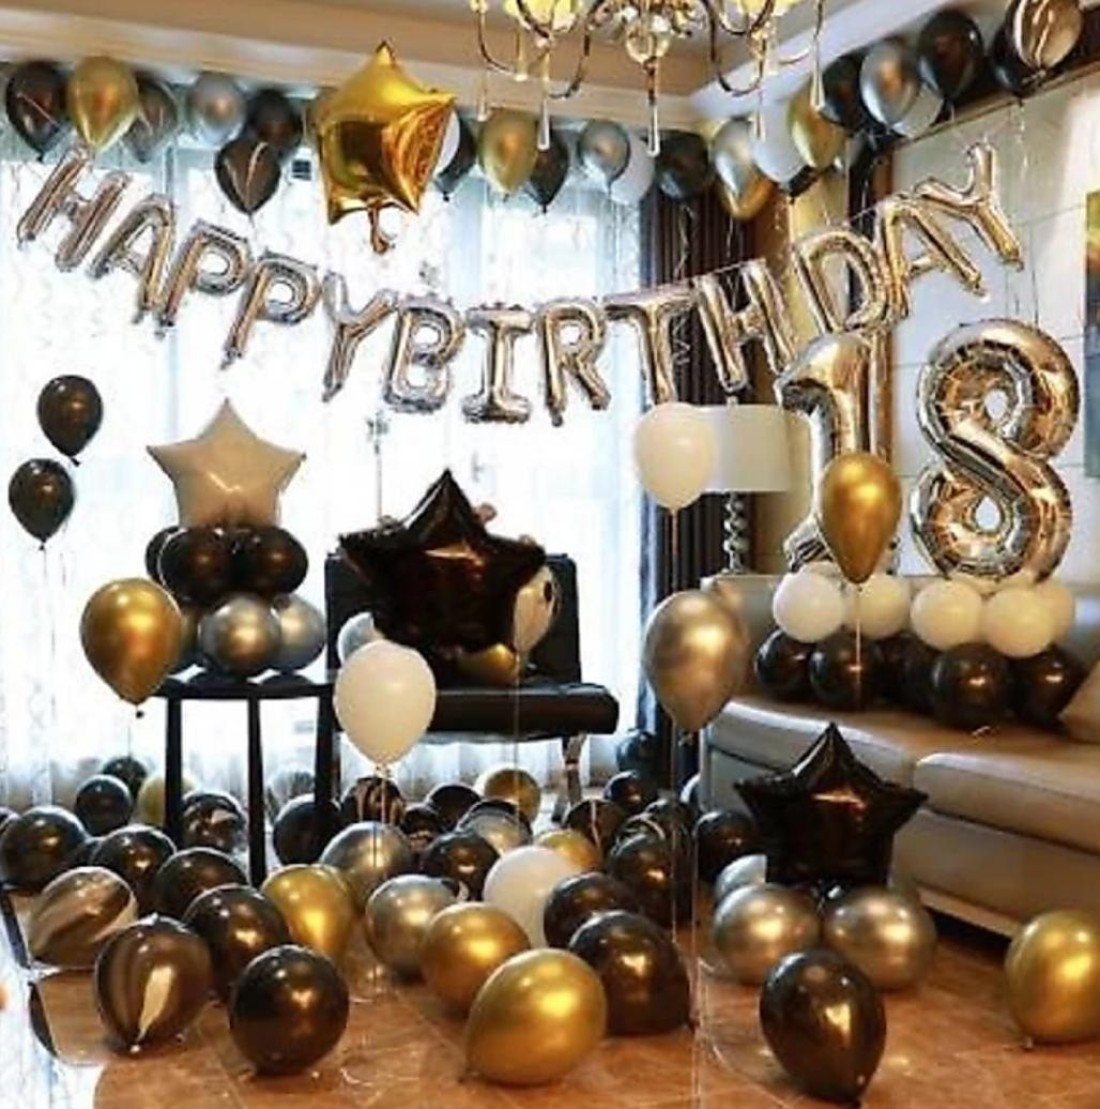 HBD Happy Birthday Decorations kit - Gold Black Silver theme for Birthday/ Party/Baby Shower/welcome home/ Season's Party Decorations - Happy Birthday  Foil Banner Silver, Gold Black and Silver Metallic Balloons Silver Star  Foils